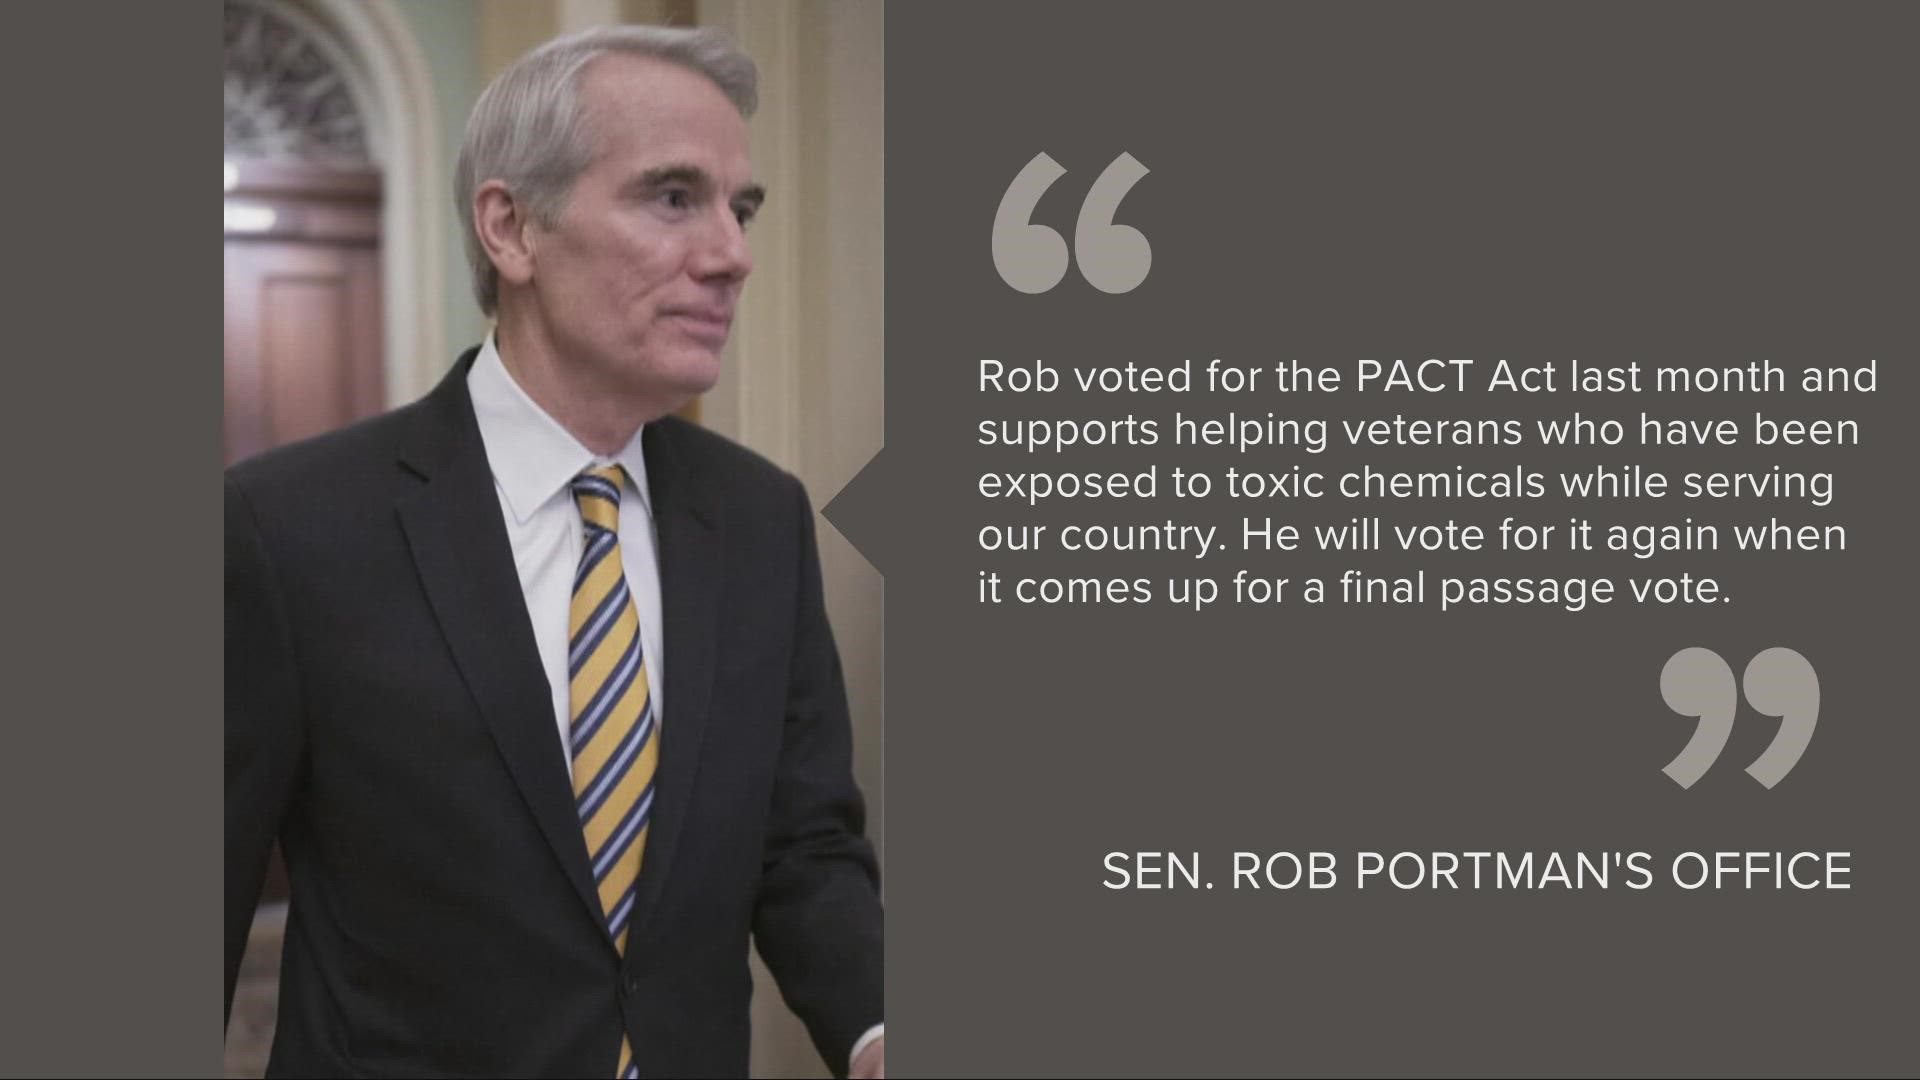 The PACT Act would help veterans exposed to toxic chemicals, such as burn pits. It was blocked by Republican members of the US Senate last week.